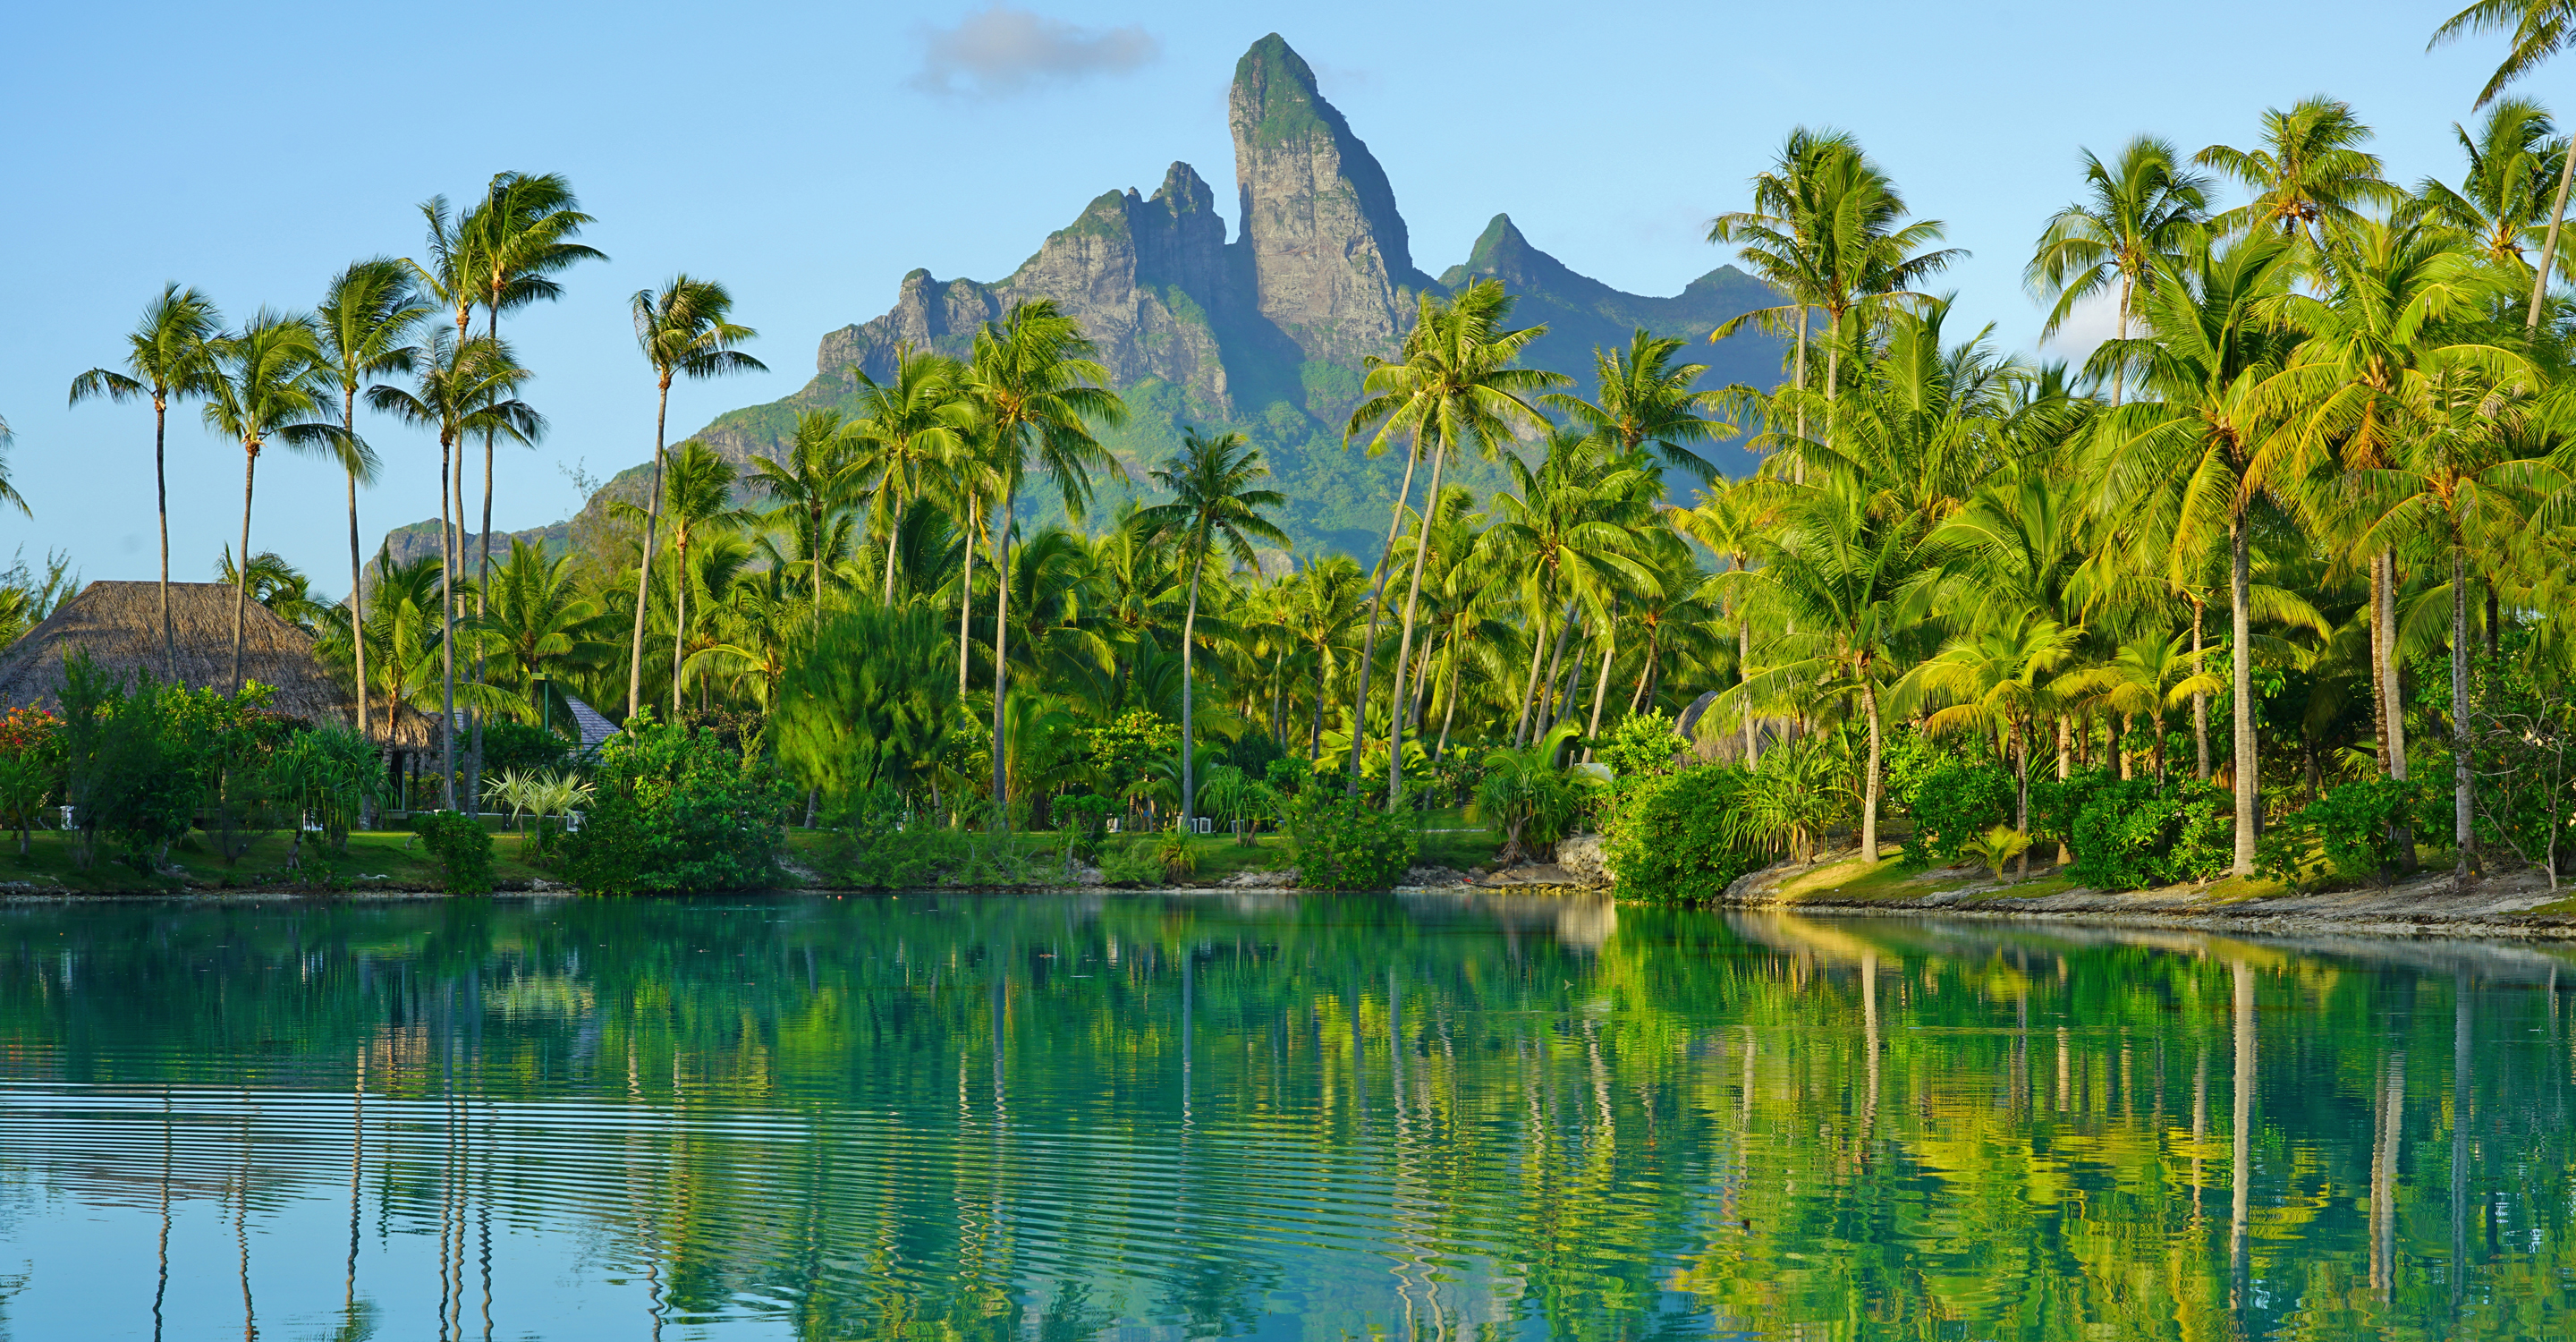 View of the Mont Otemanu mountain at sunset in Bora Bora, French Polynesia, South Pacific